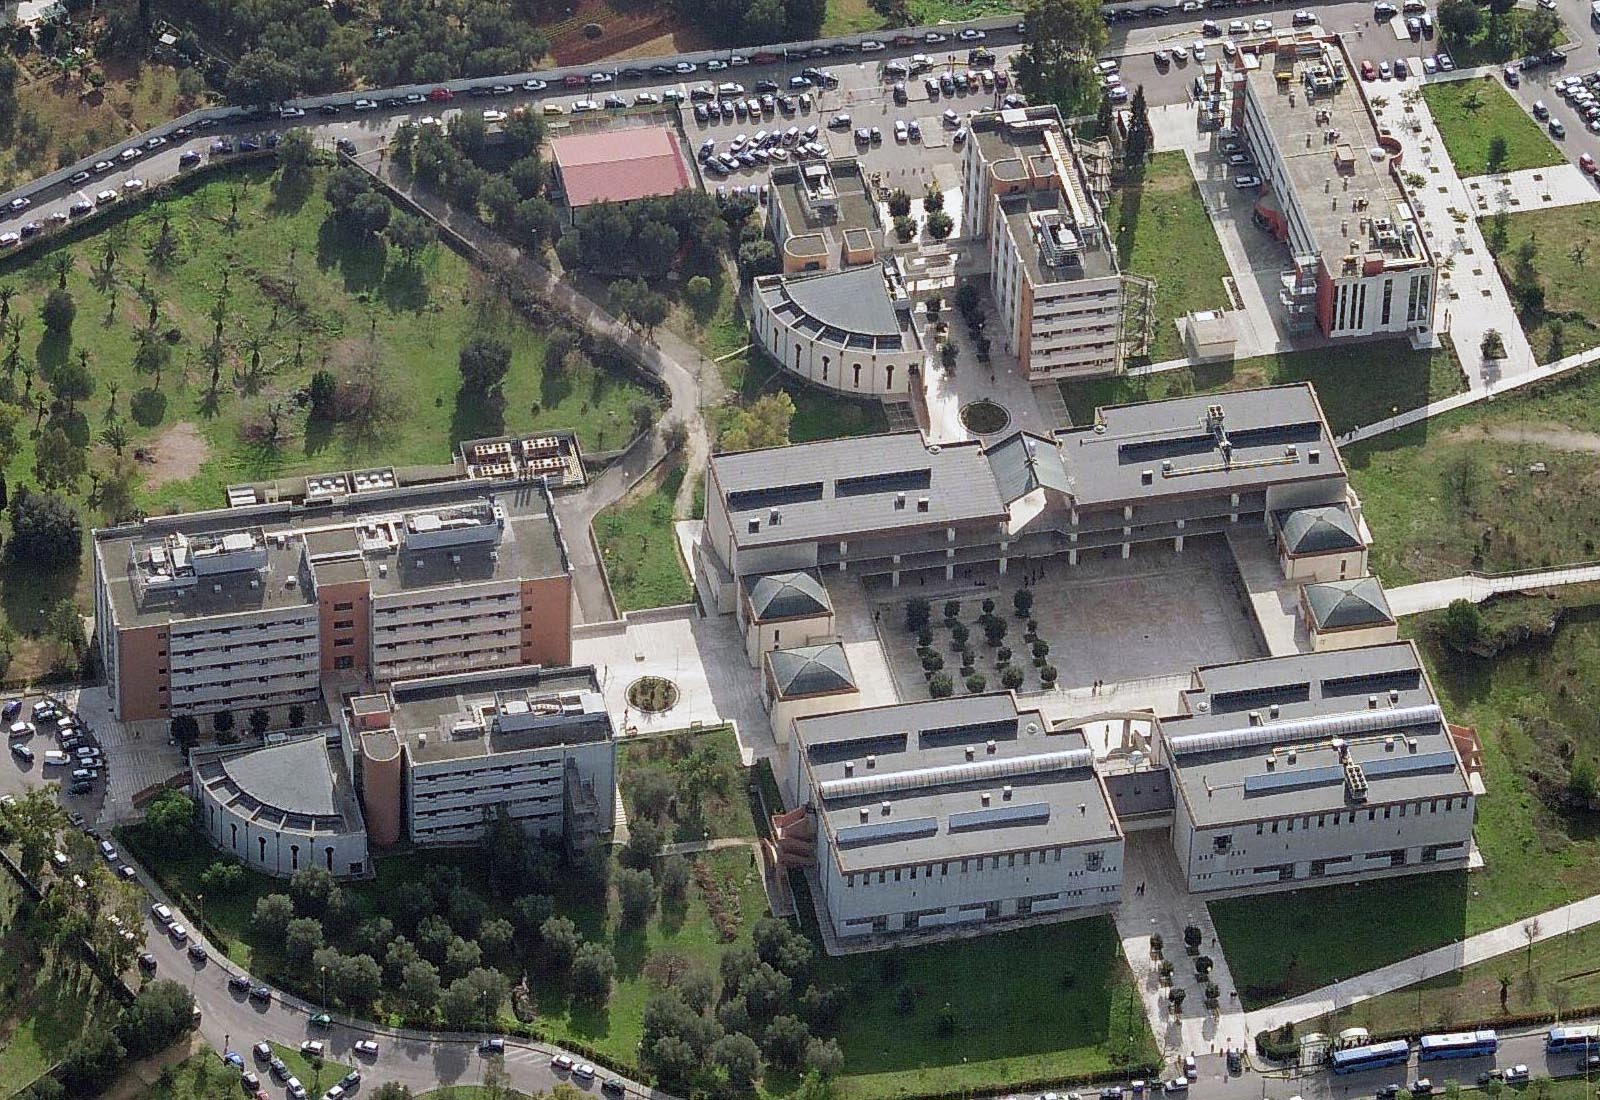 Ecotekne university center in Lecce - The classrooms building and the departmental buildings